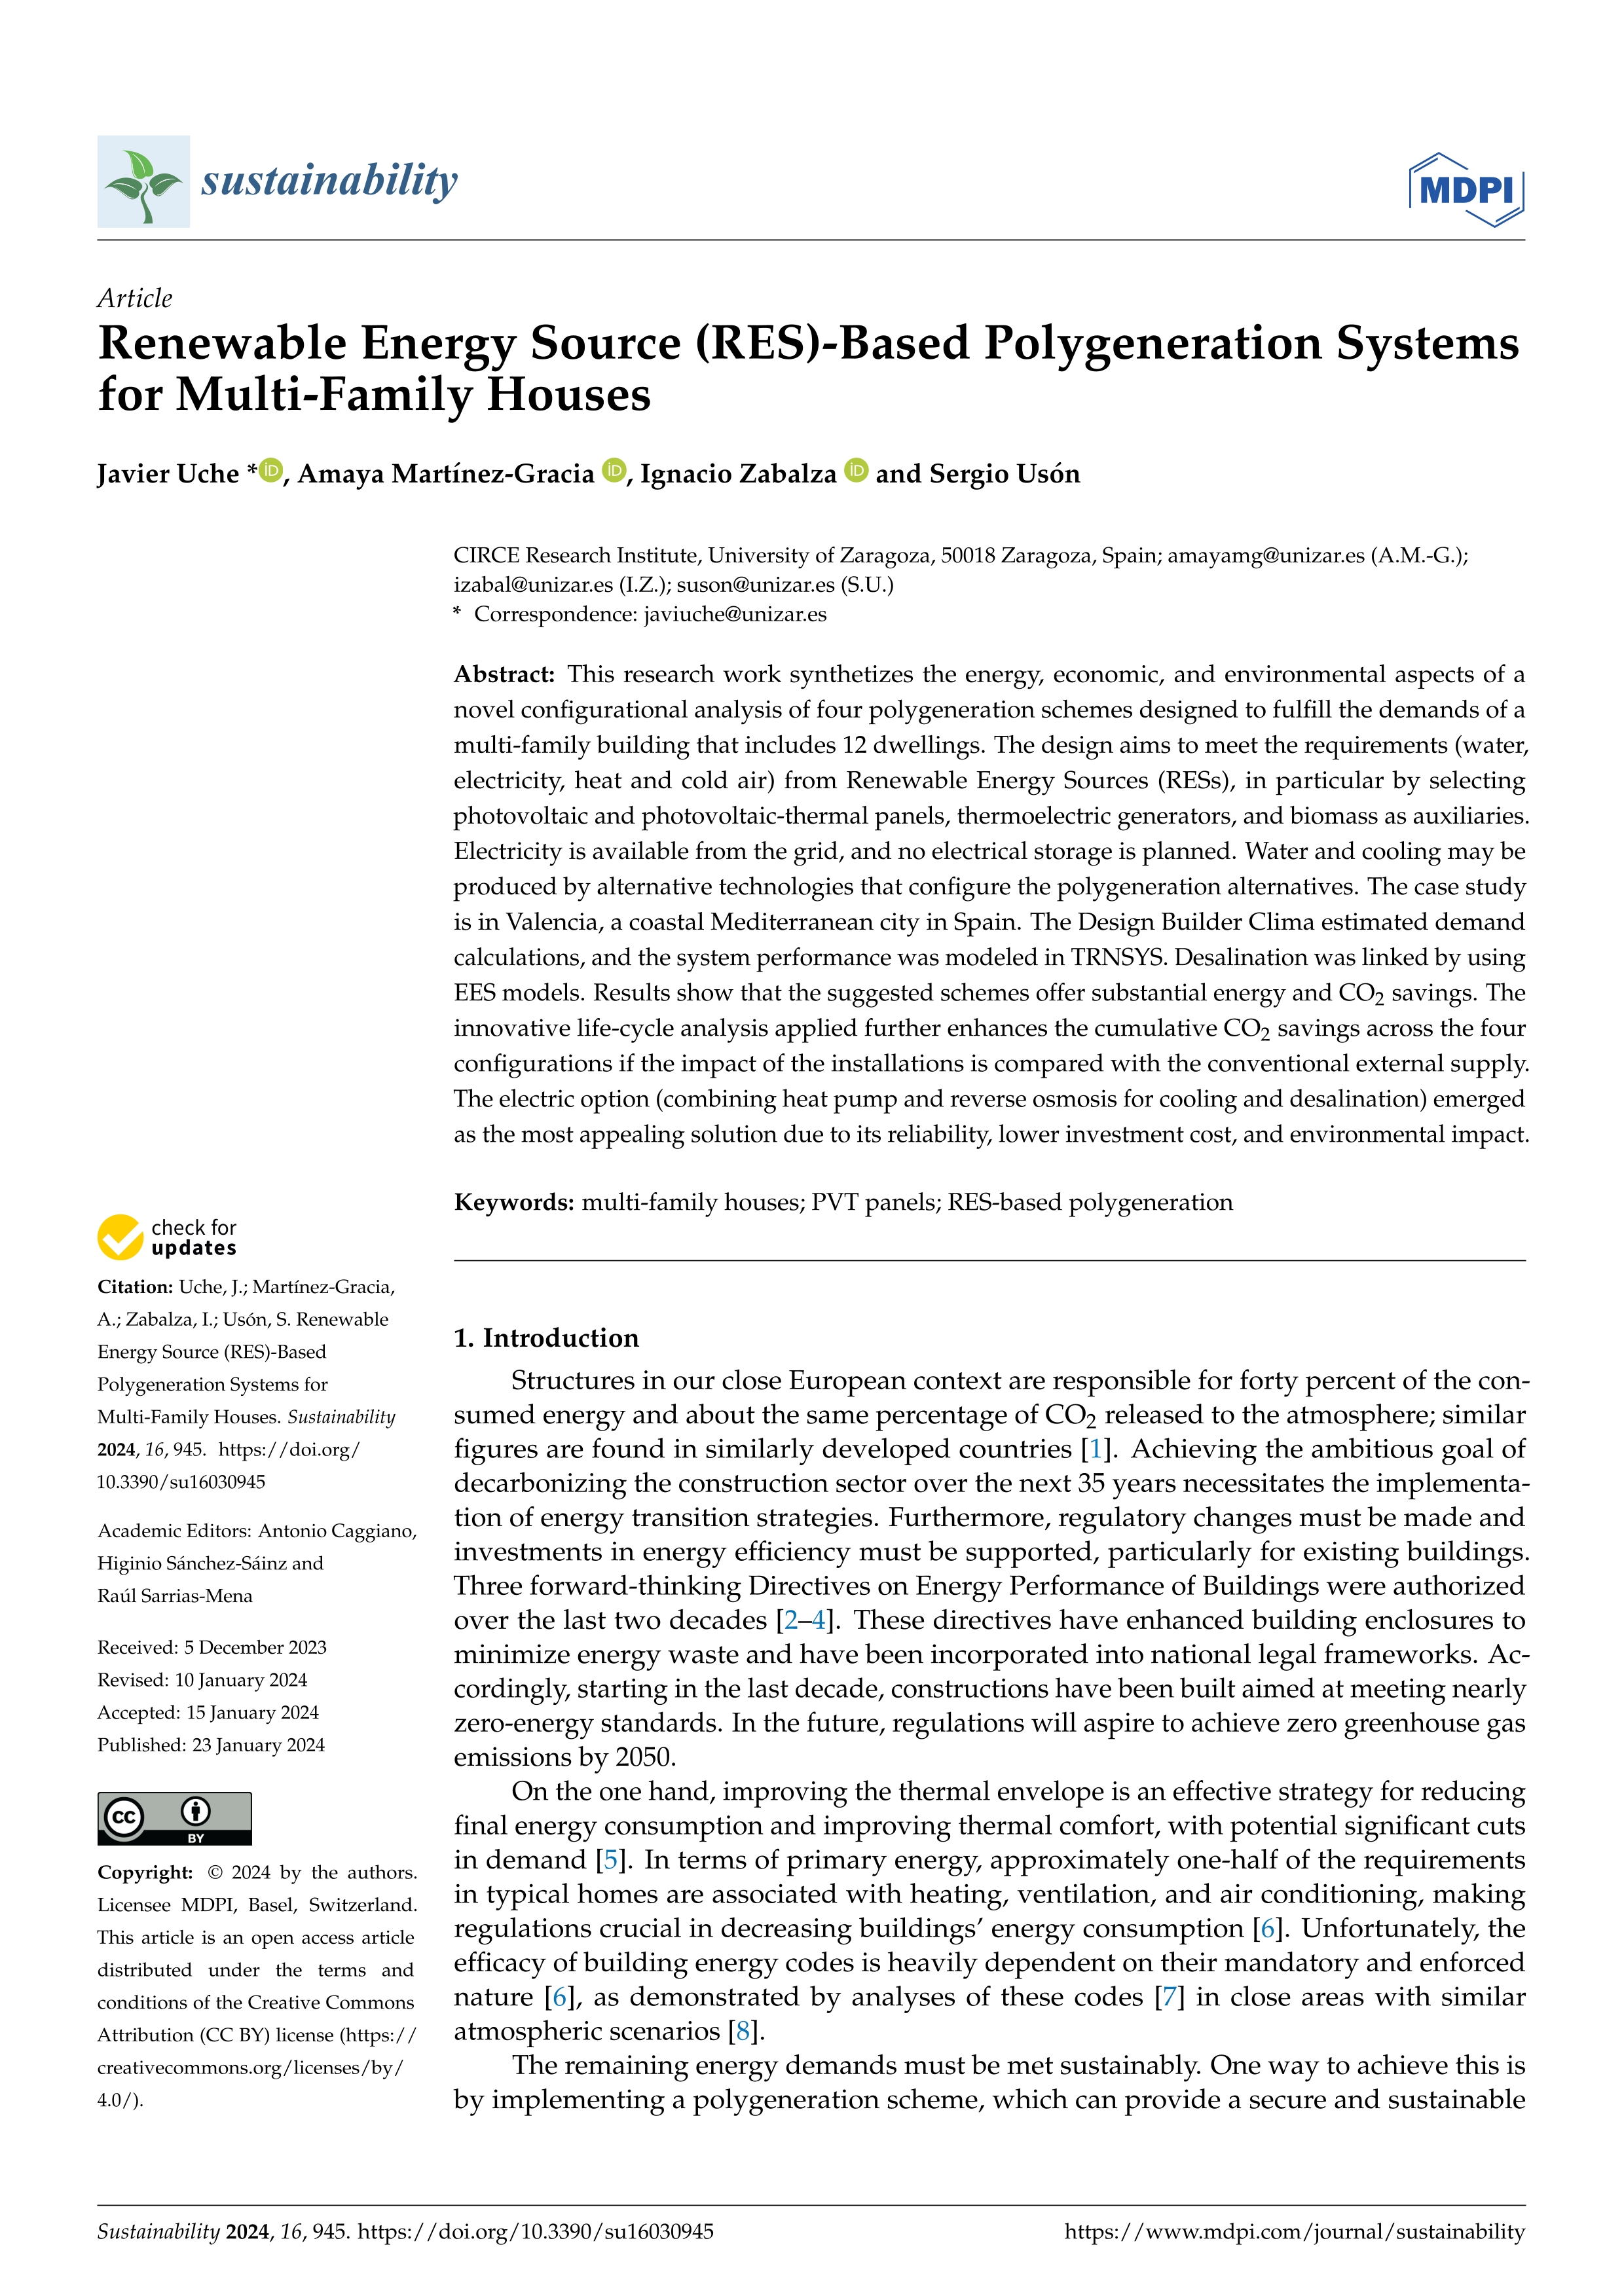 Renewable Energy Source (RES)-Based Polygeneration Systems for Multi-Family Houses